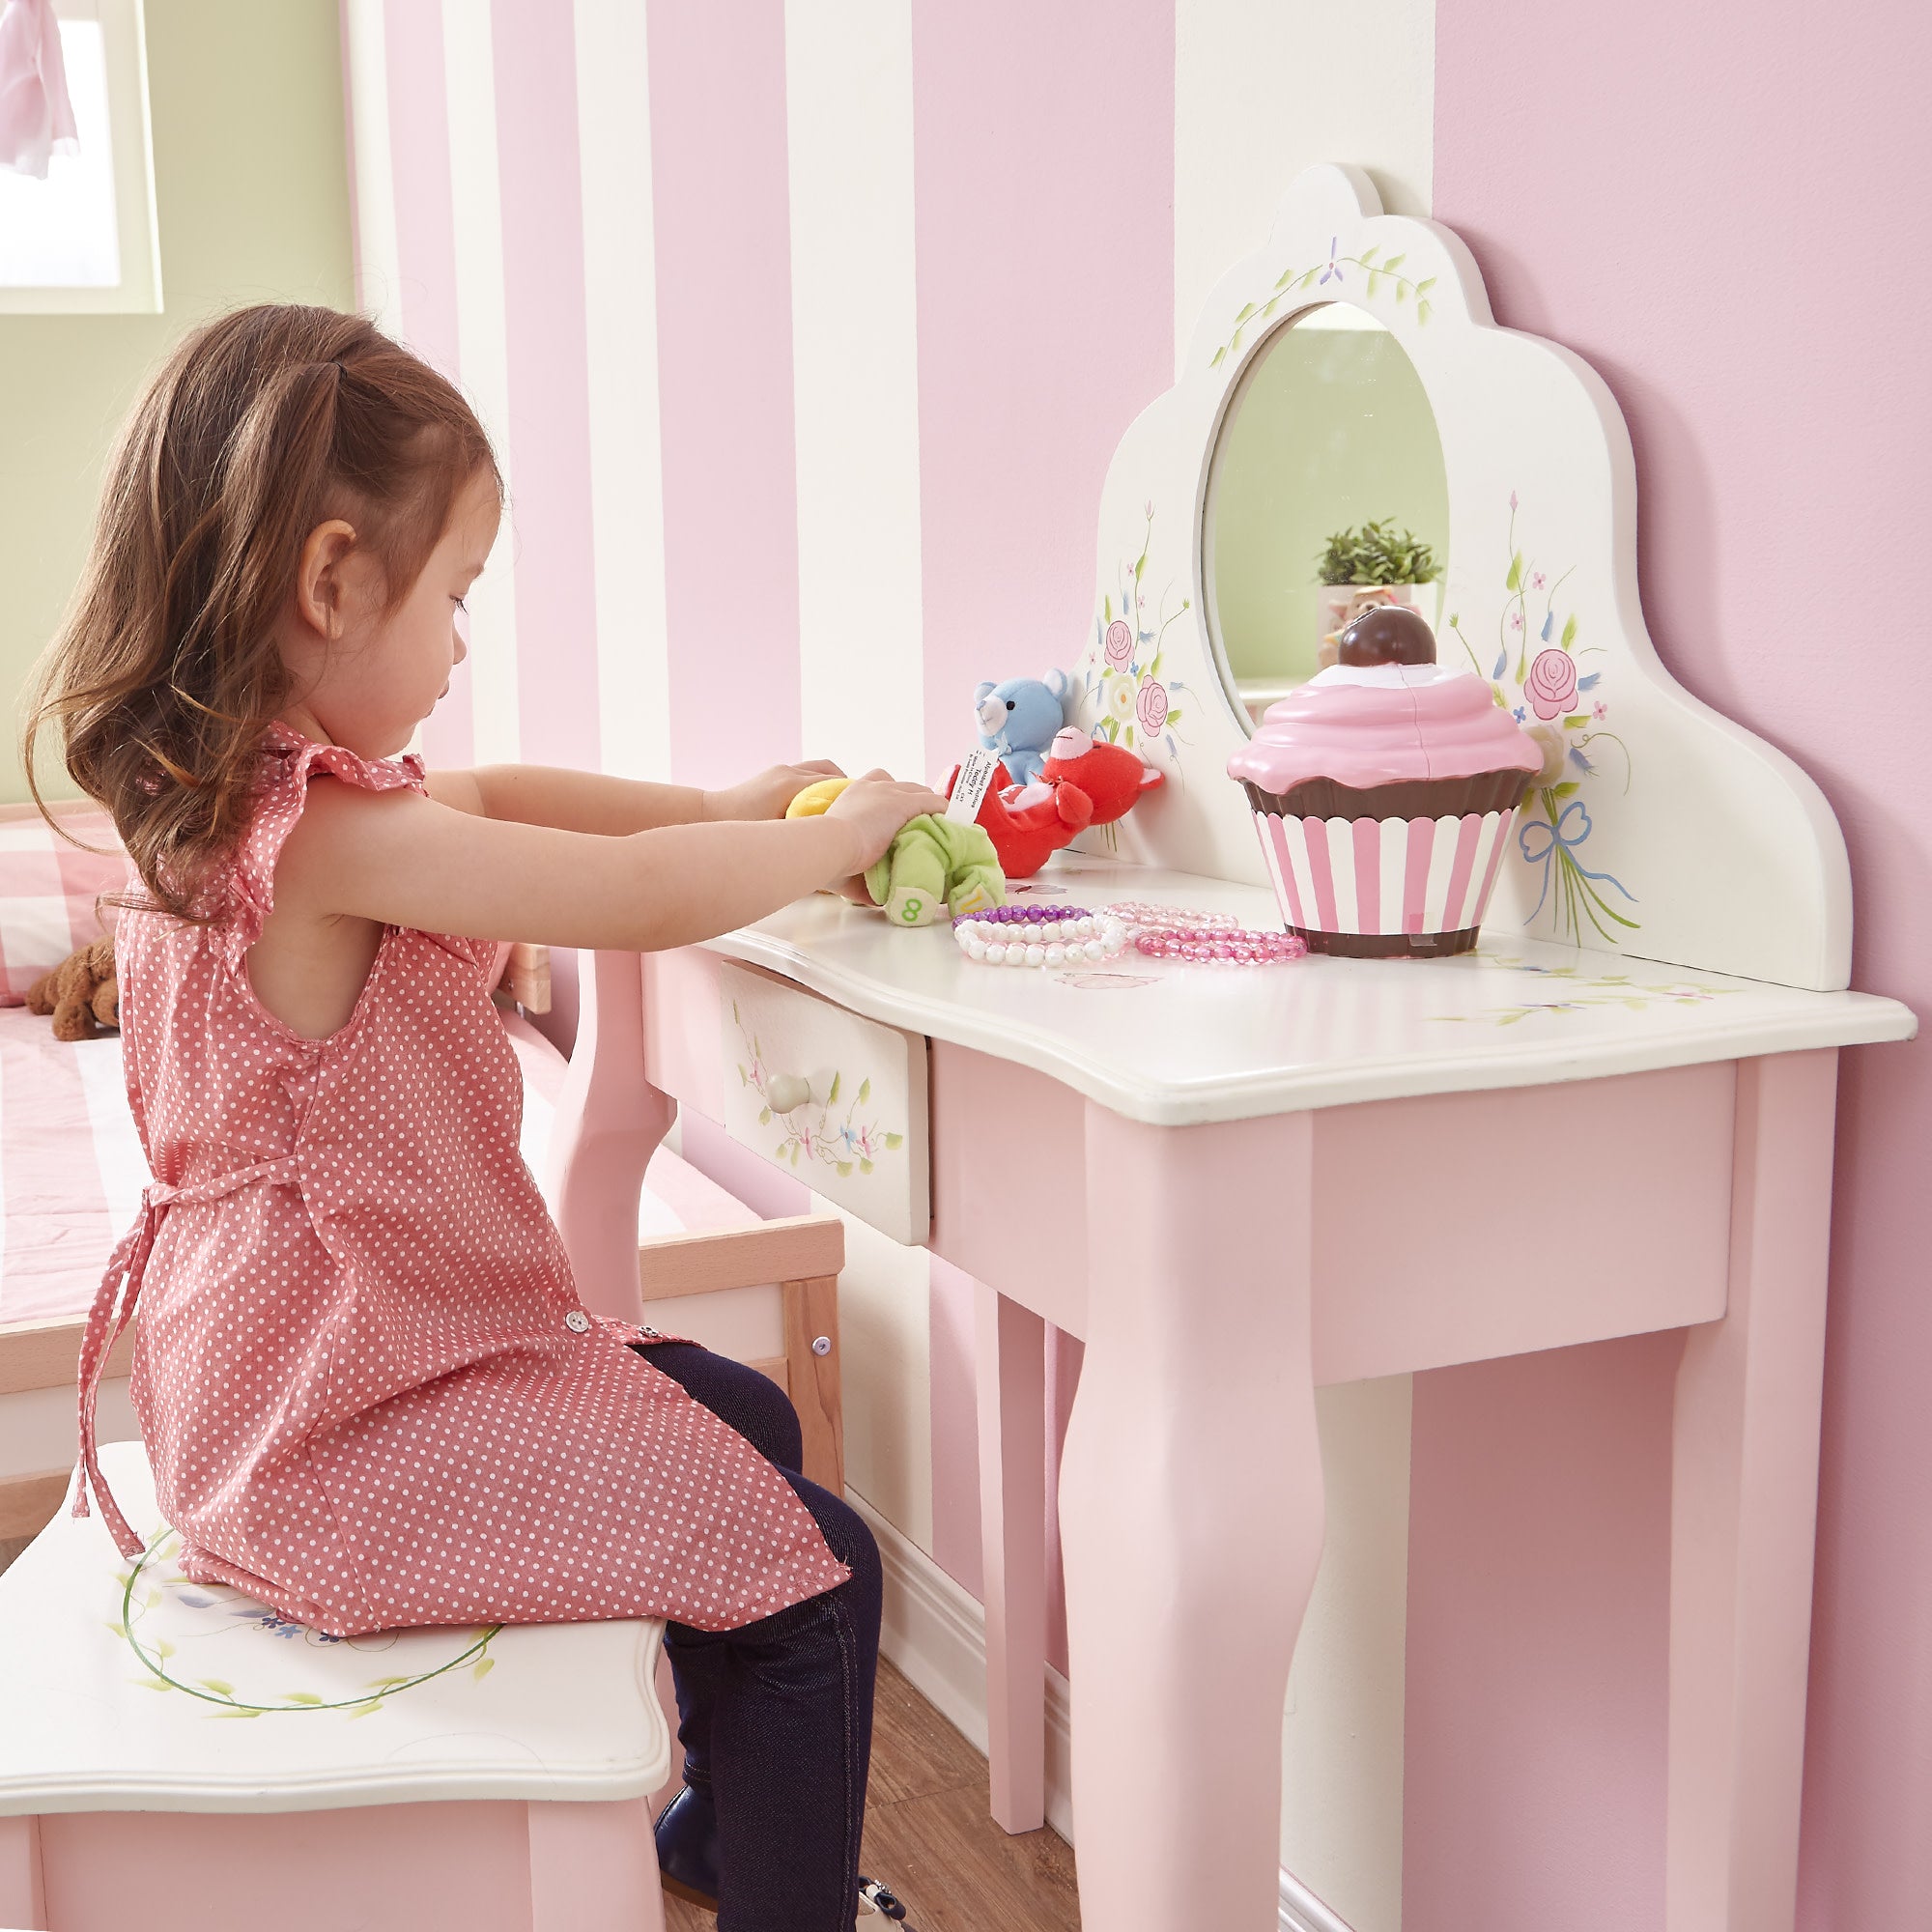 Fantasy Fields Kids Furniture Play Vanity Table and Stool, Pink/White